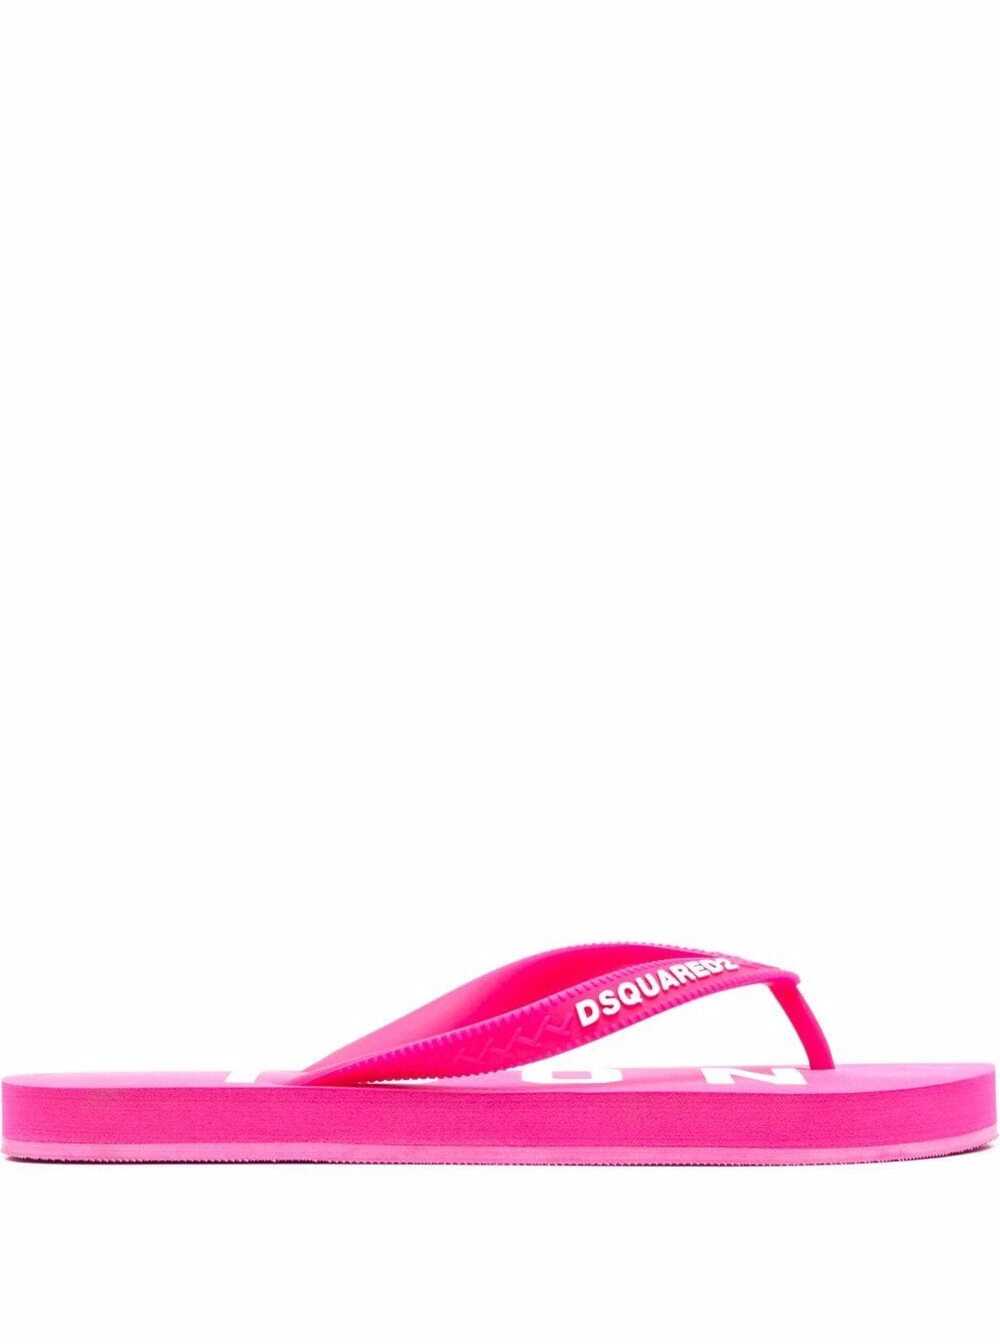 Dsquared2 D-squared2 Womans Pink Rubber Flip Flops With Logo Print